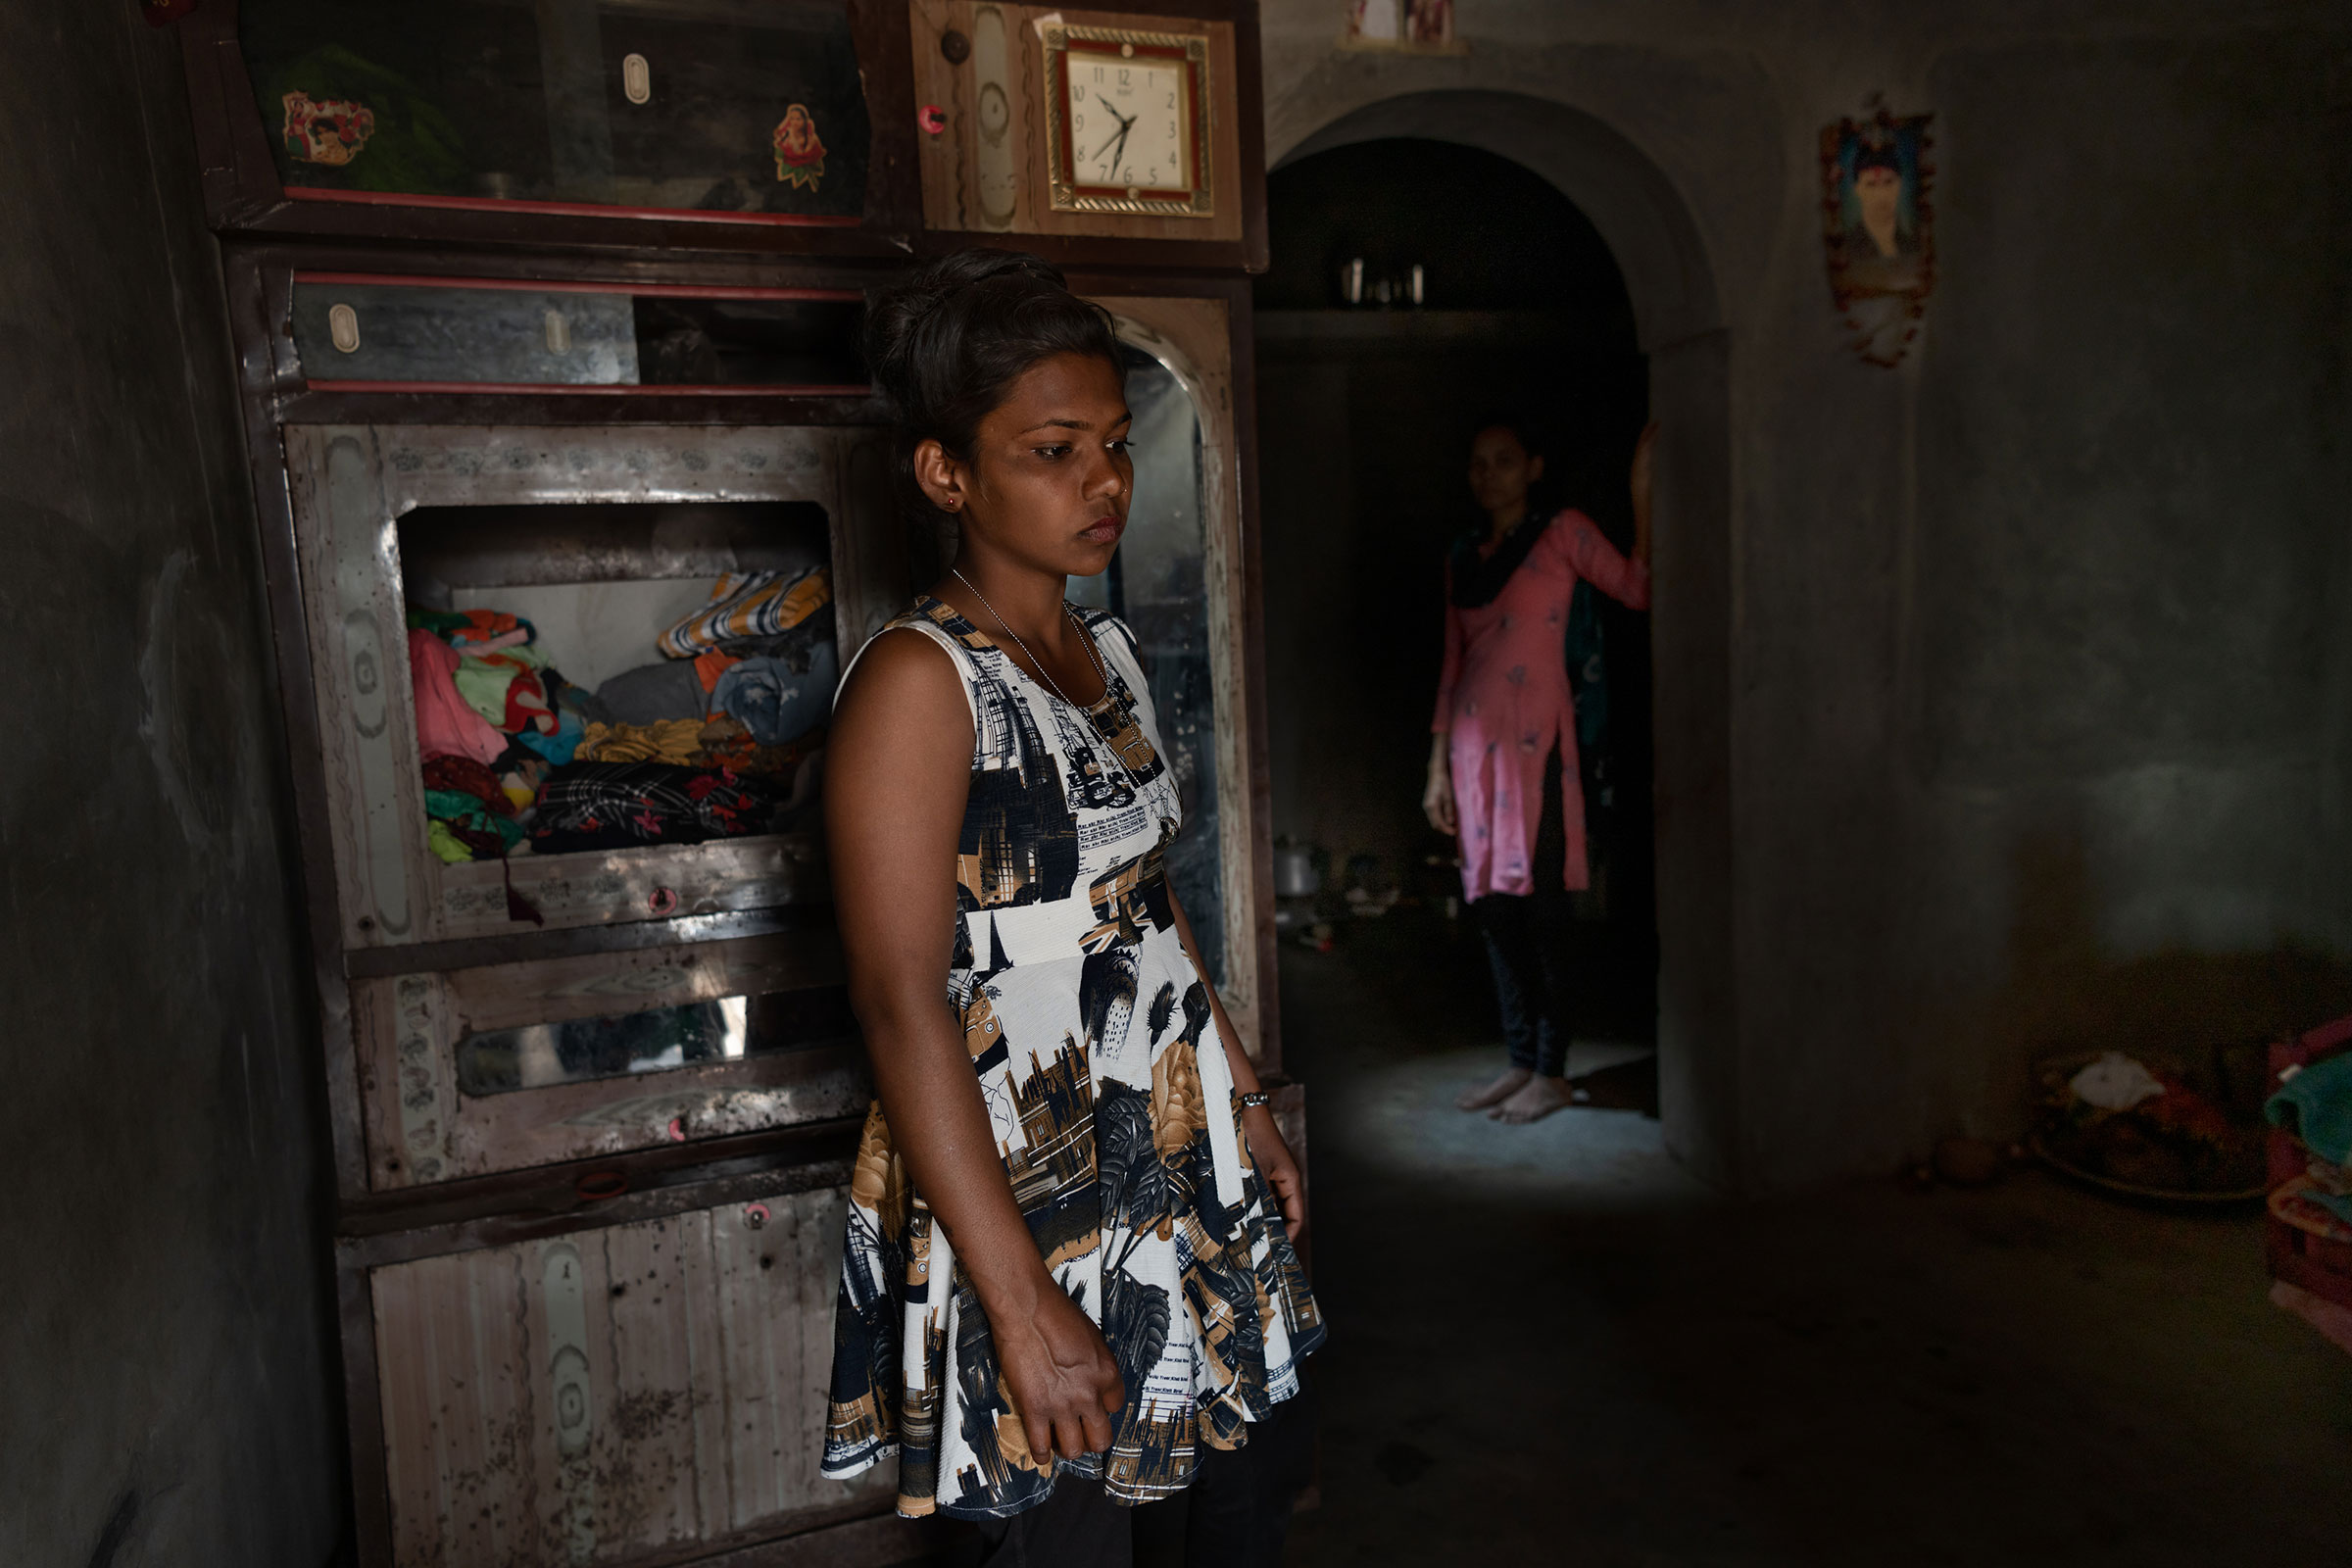 Indias Commercial Surrogacy Ban Could Hurt Low-Income Women Time photo